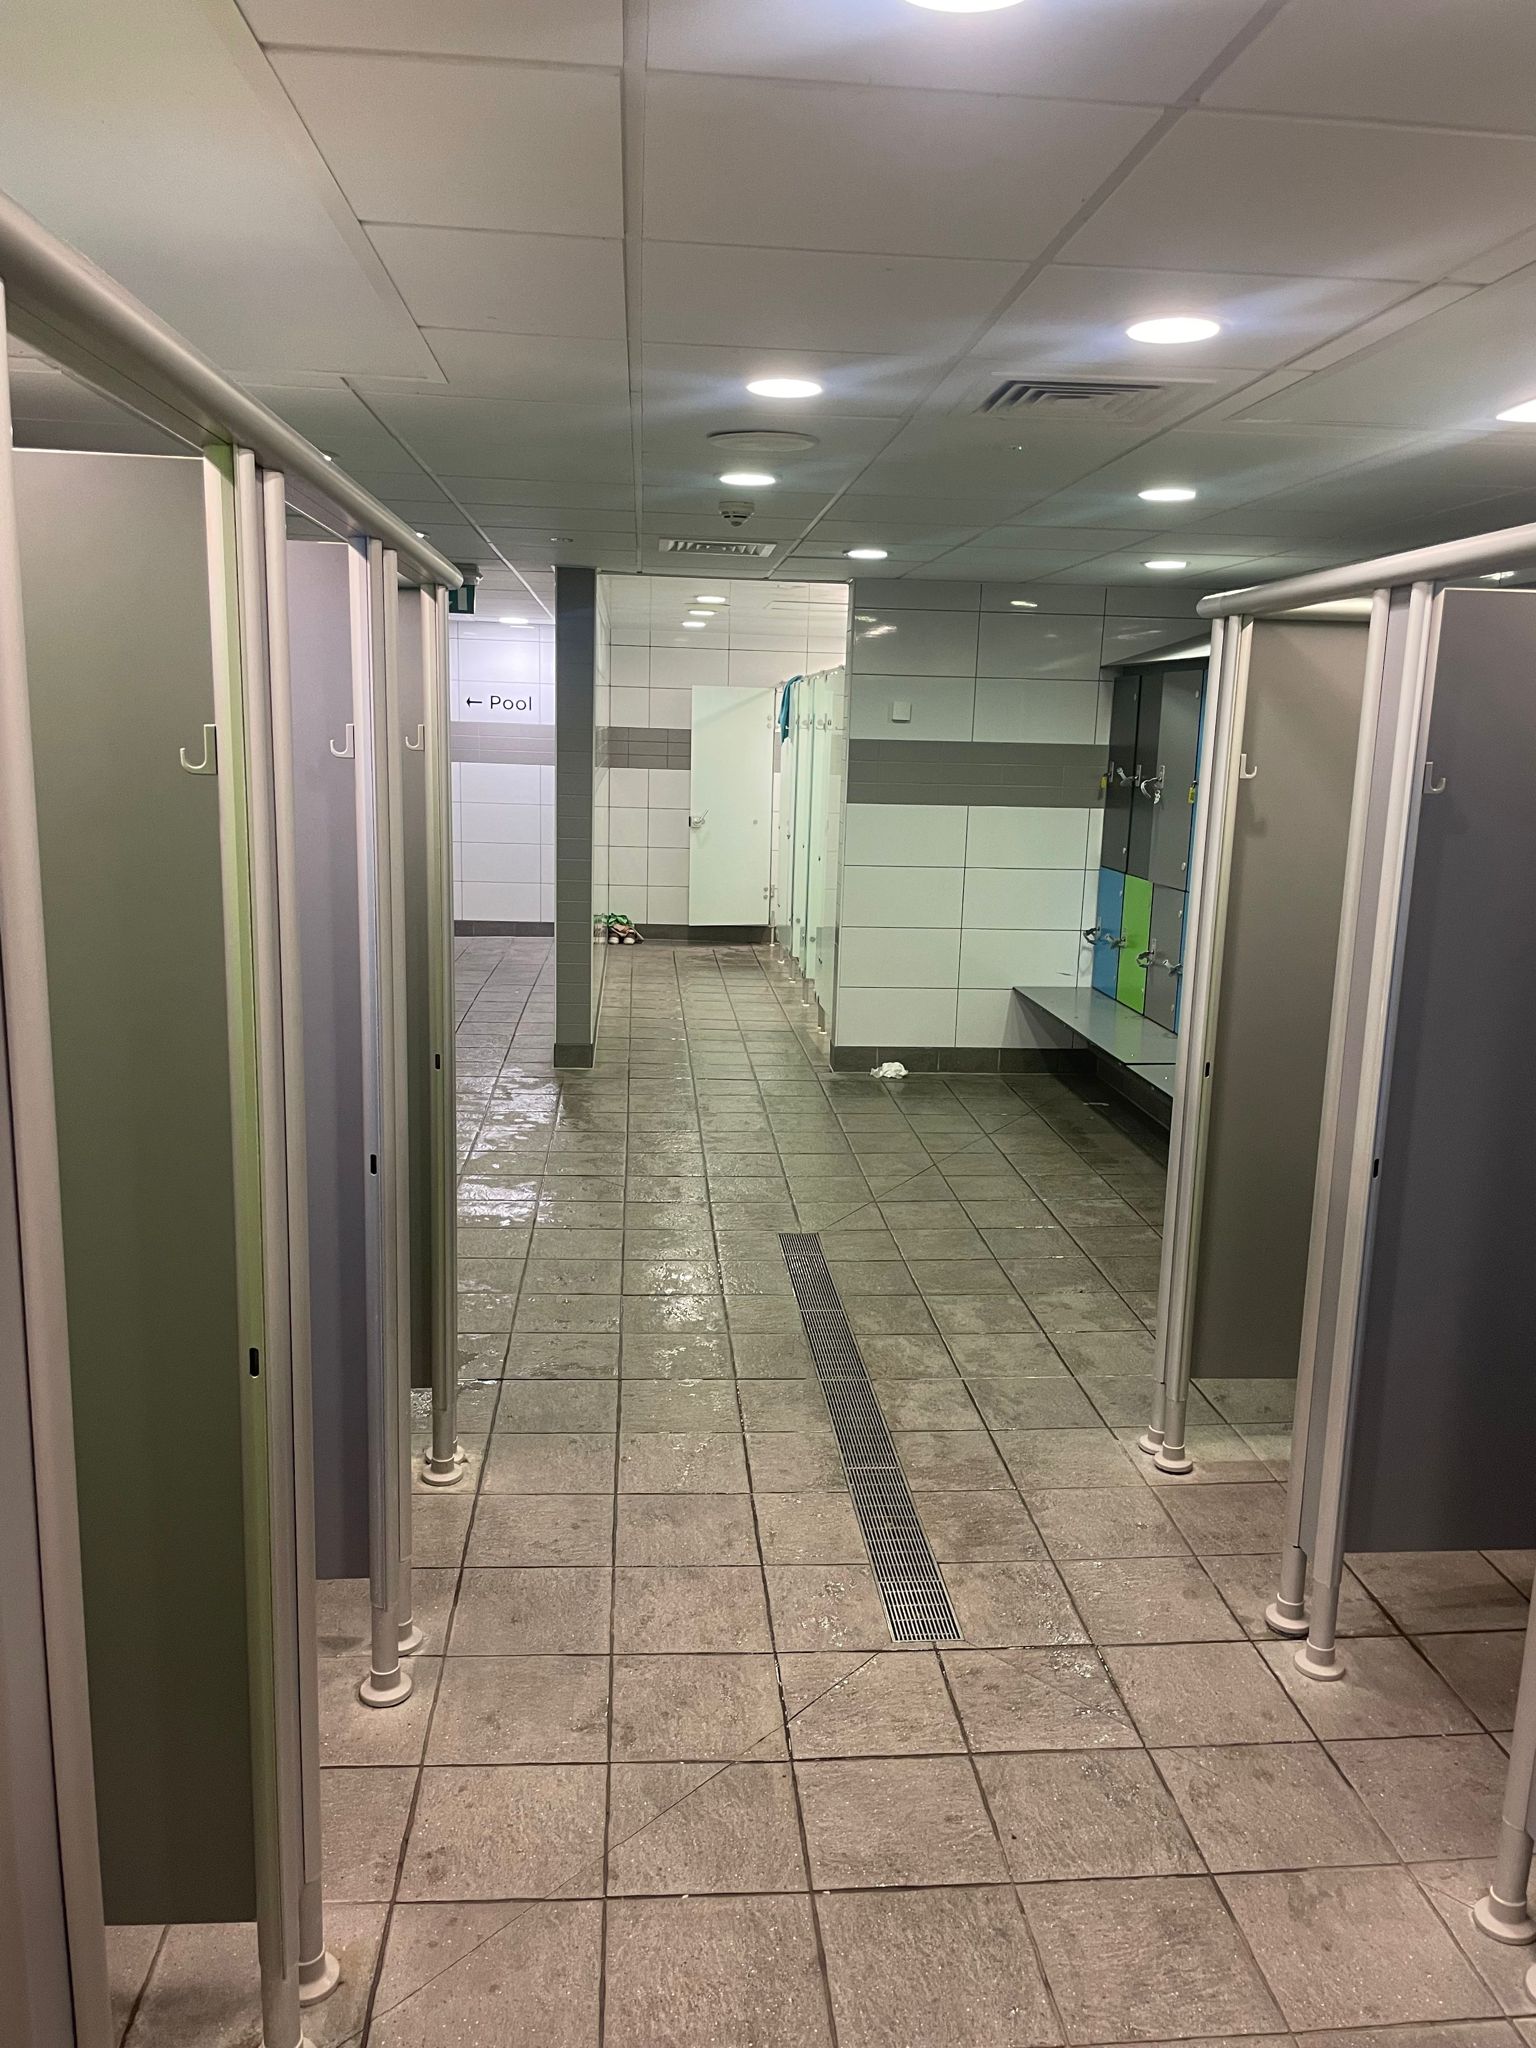 single sex changing room with benches in group change and changing cubicles